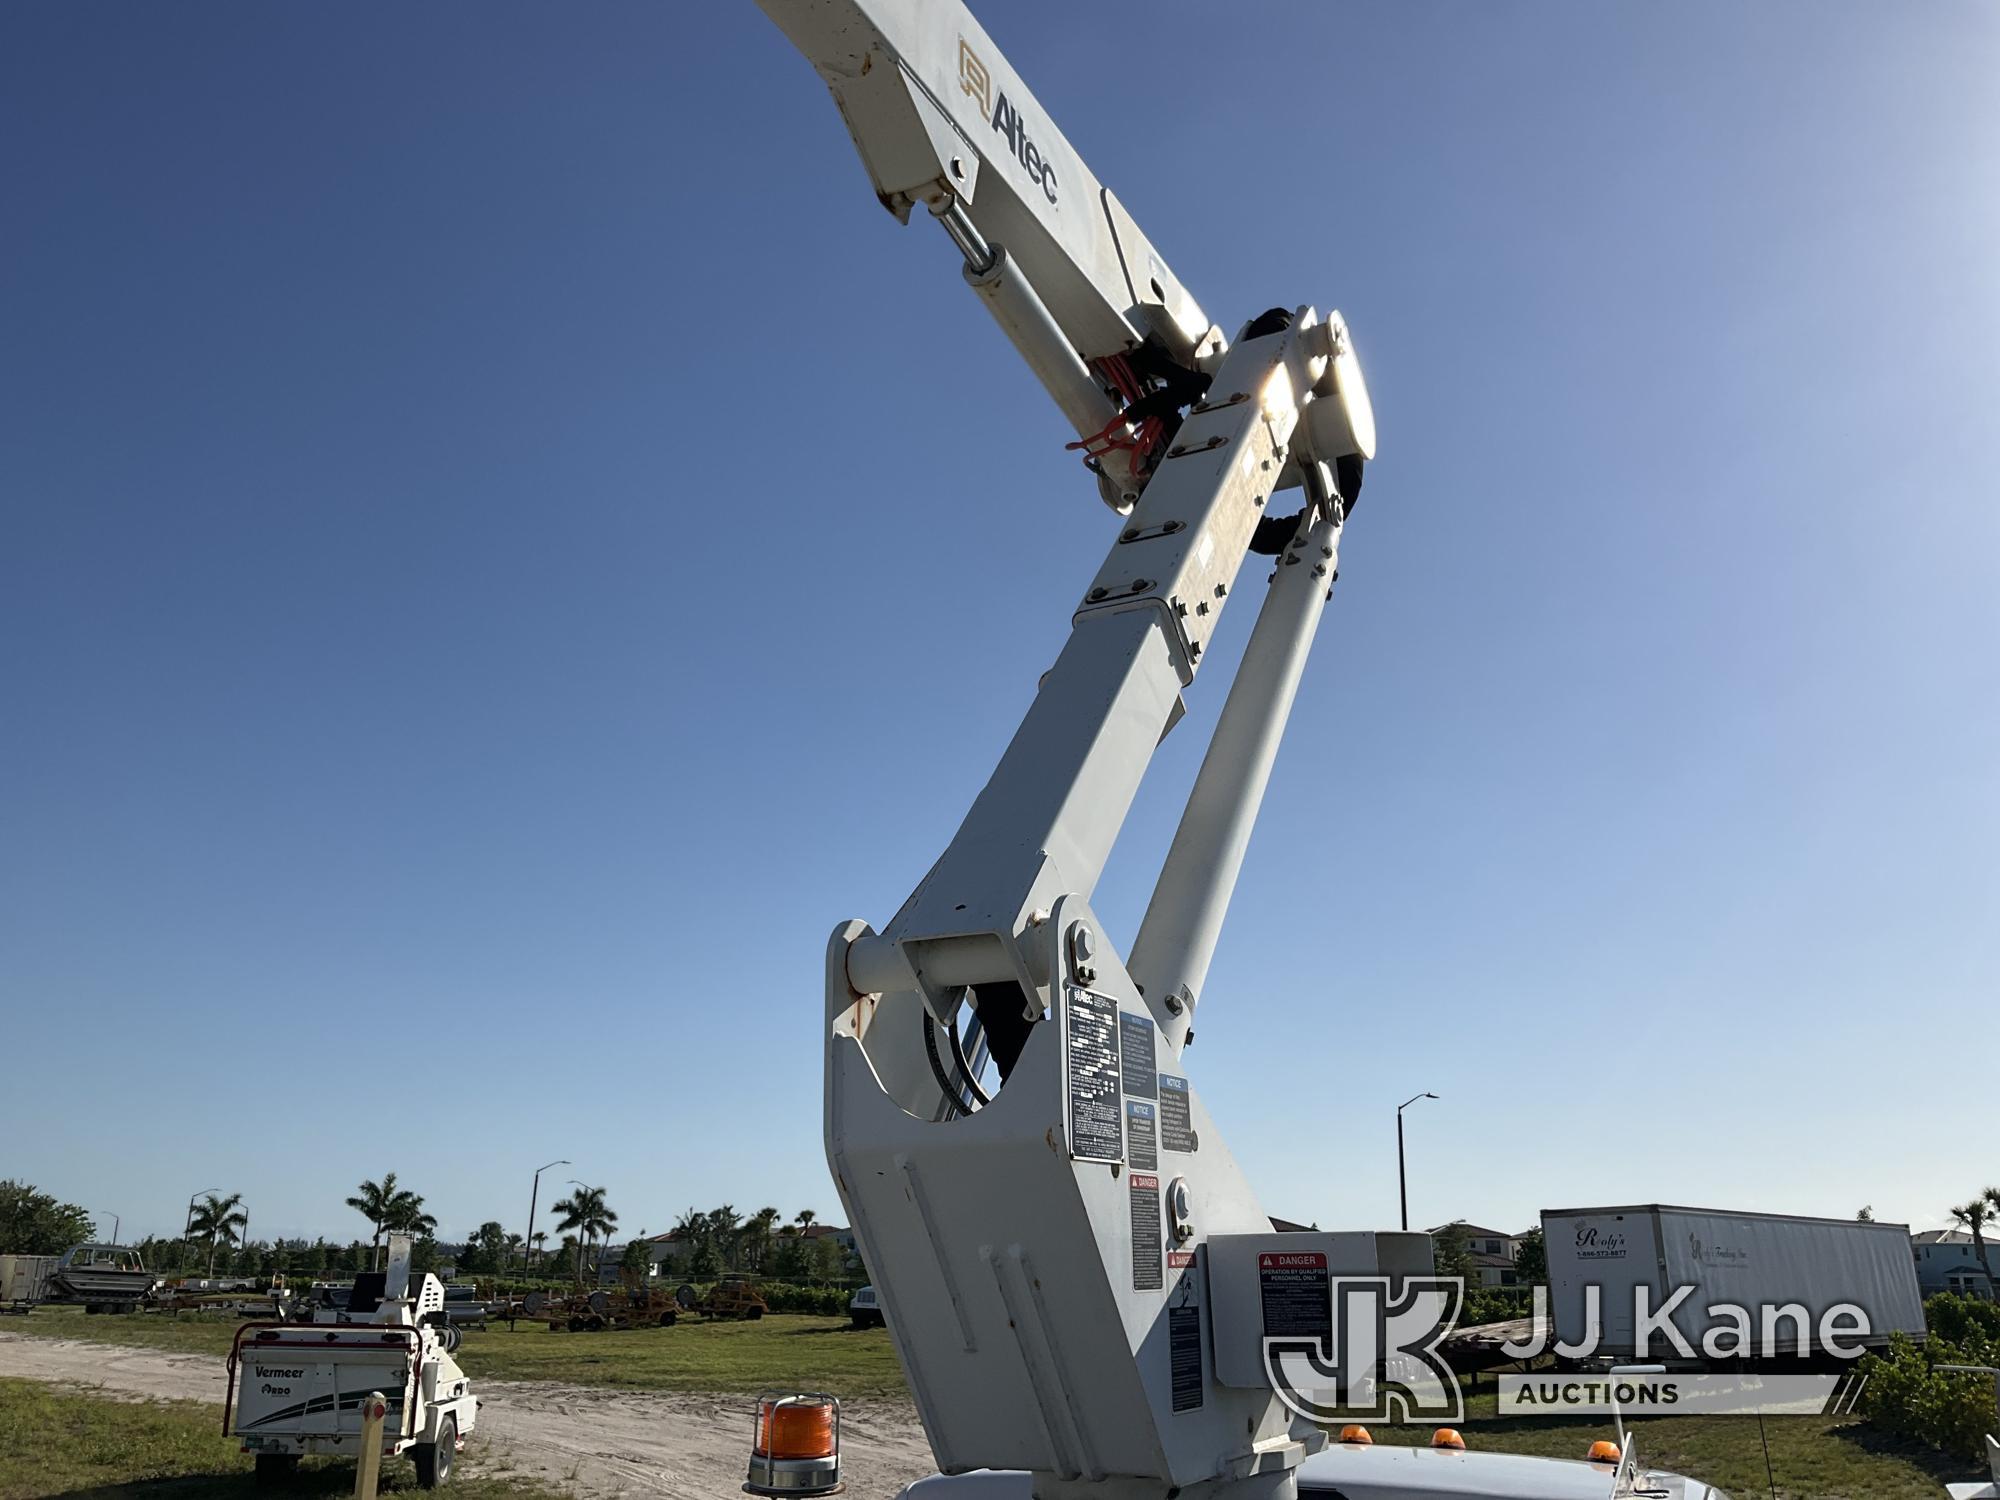 (Westlake, FL) Altec AT37G, Articulating & Telescopic Bucket Truck mounted behind cab on 2016 Ford F